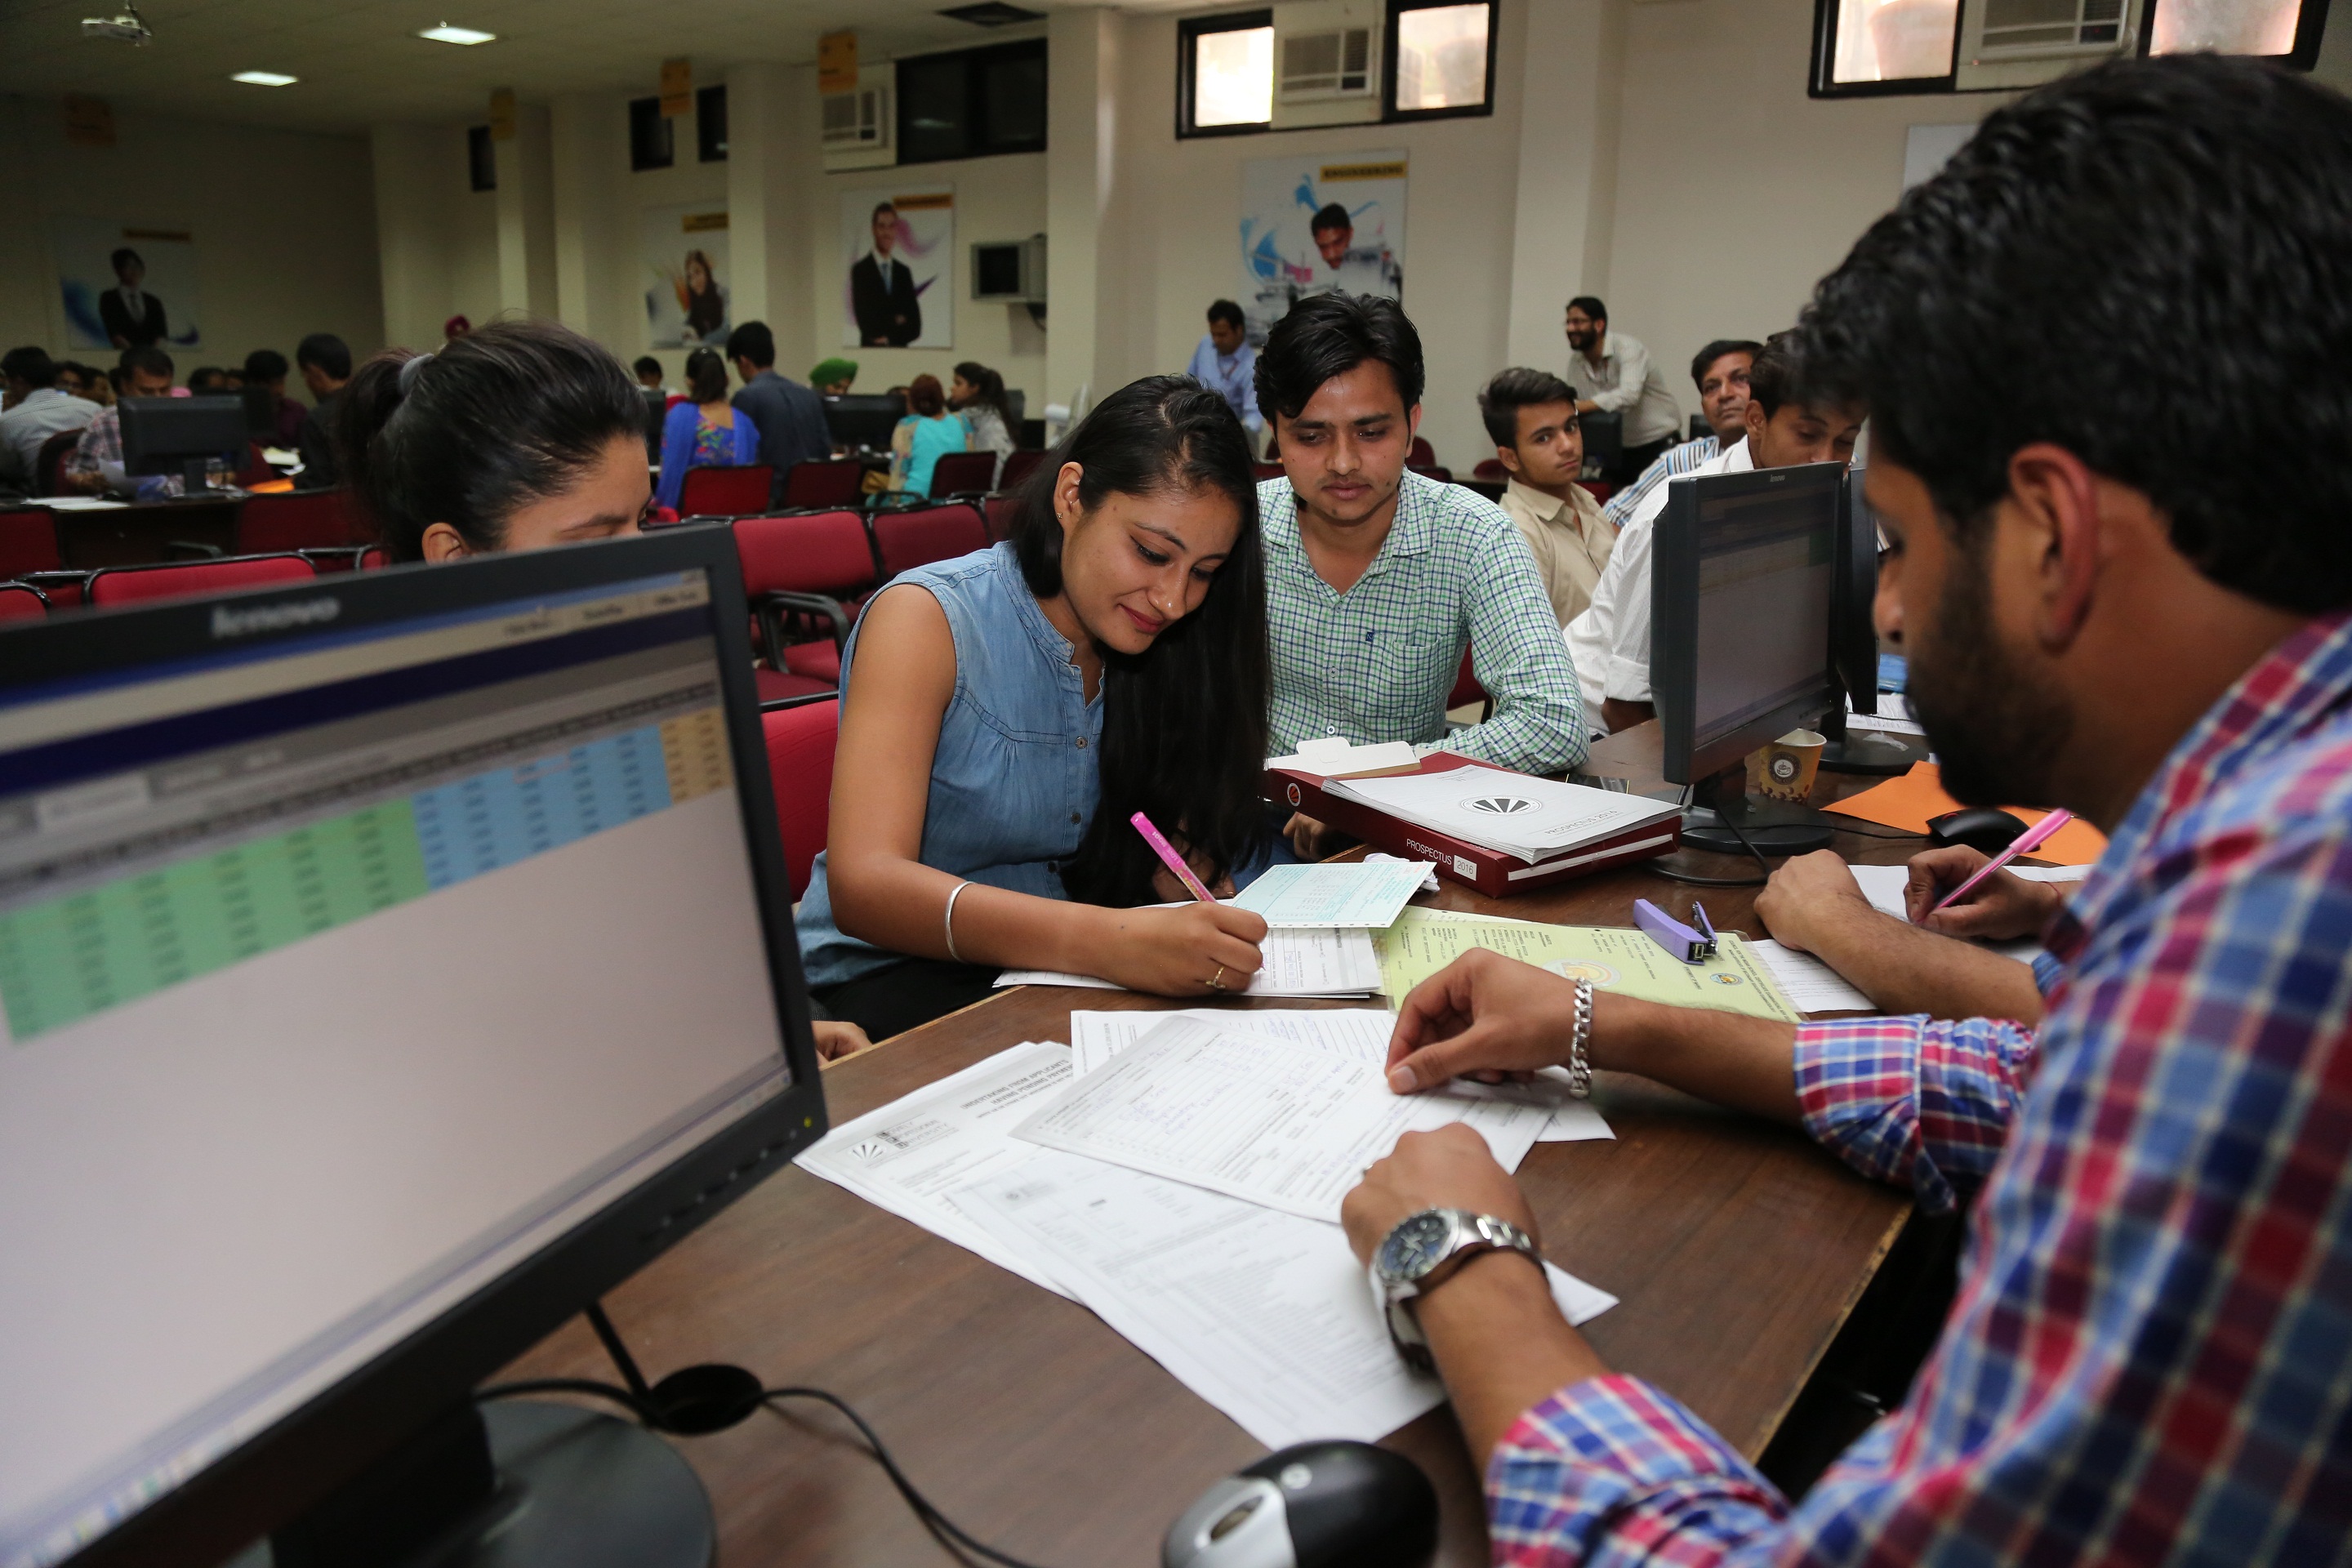 Students are coming to LPU to take admission in specialised oriented programs